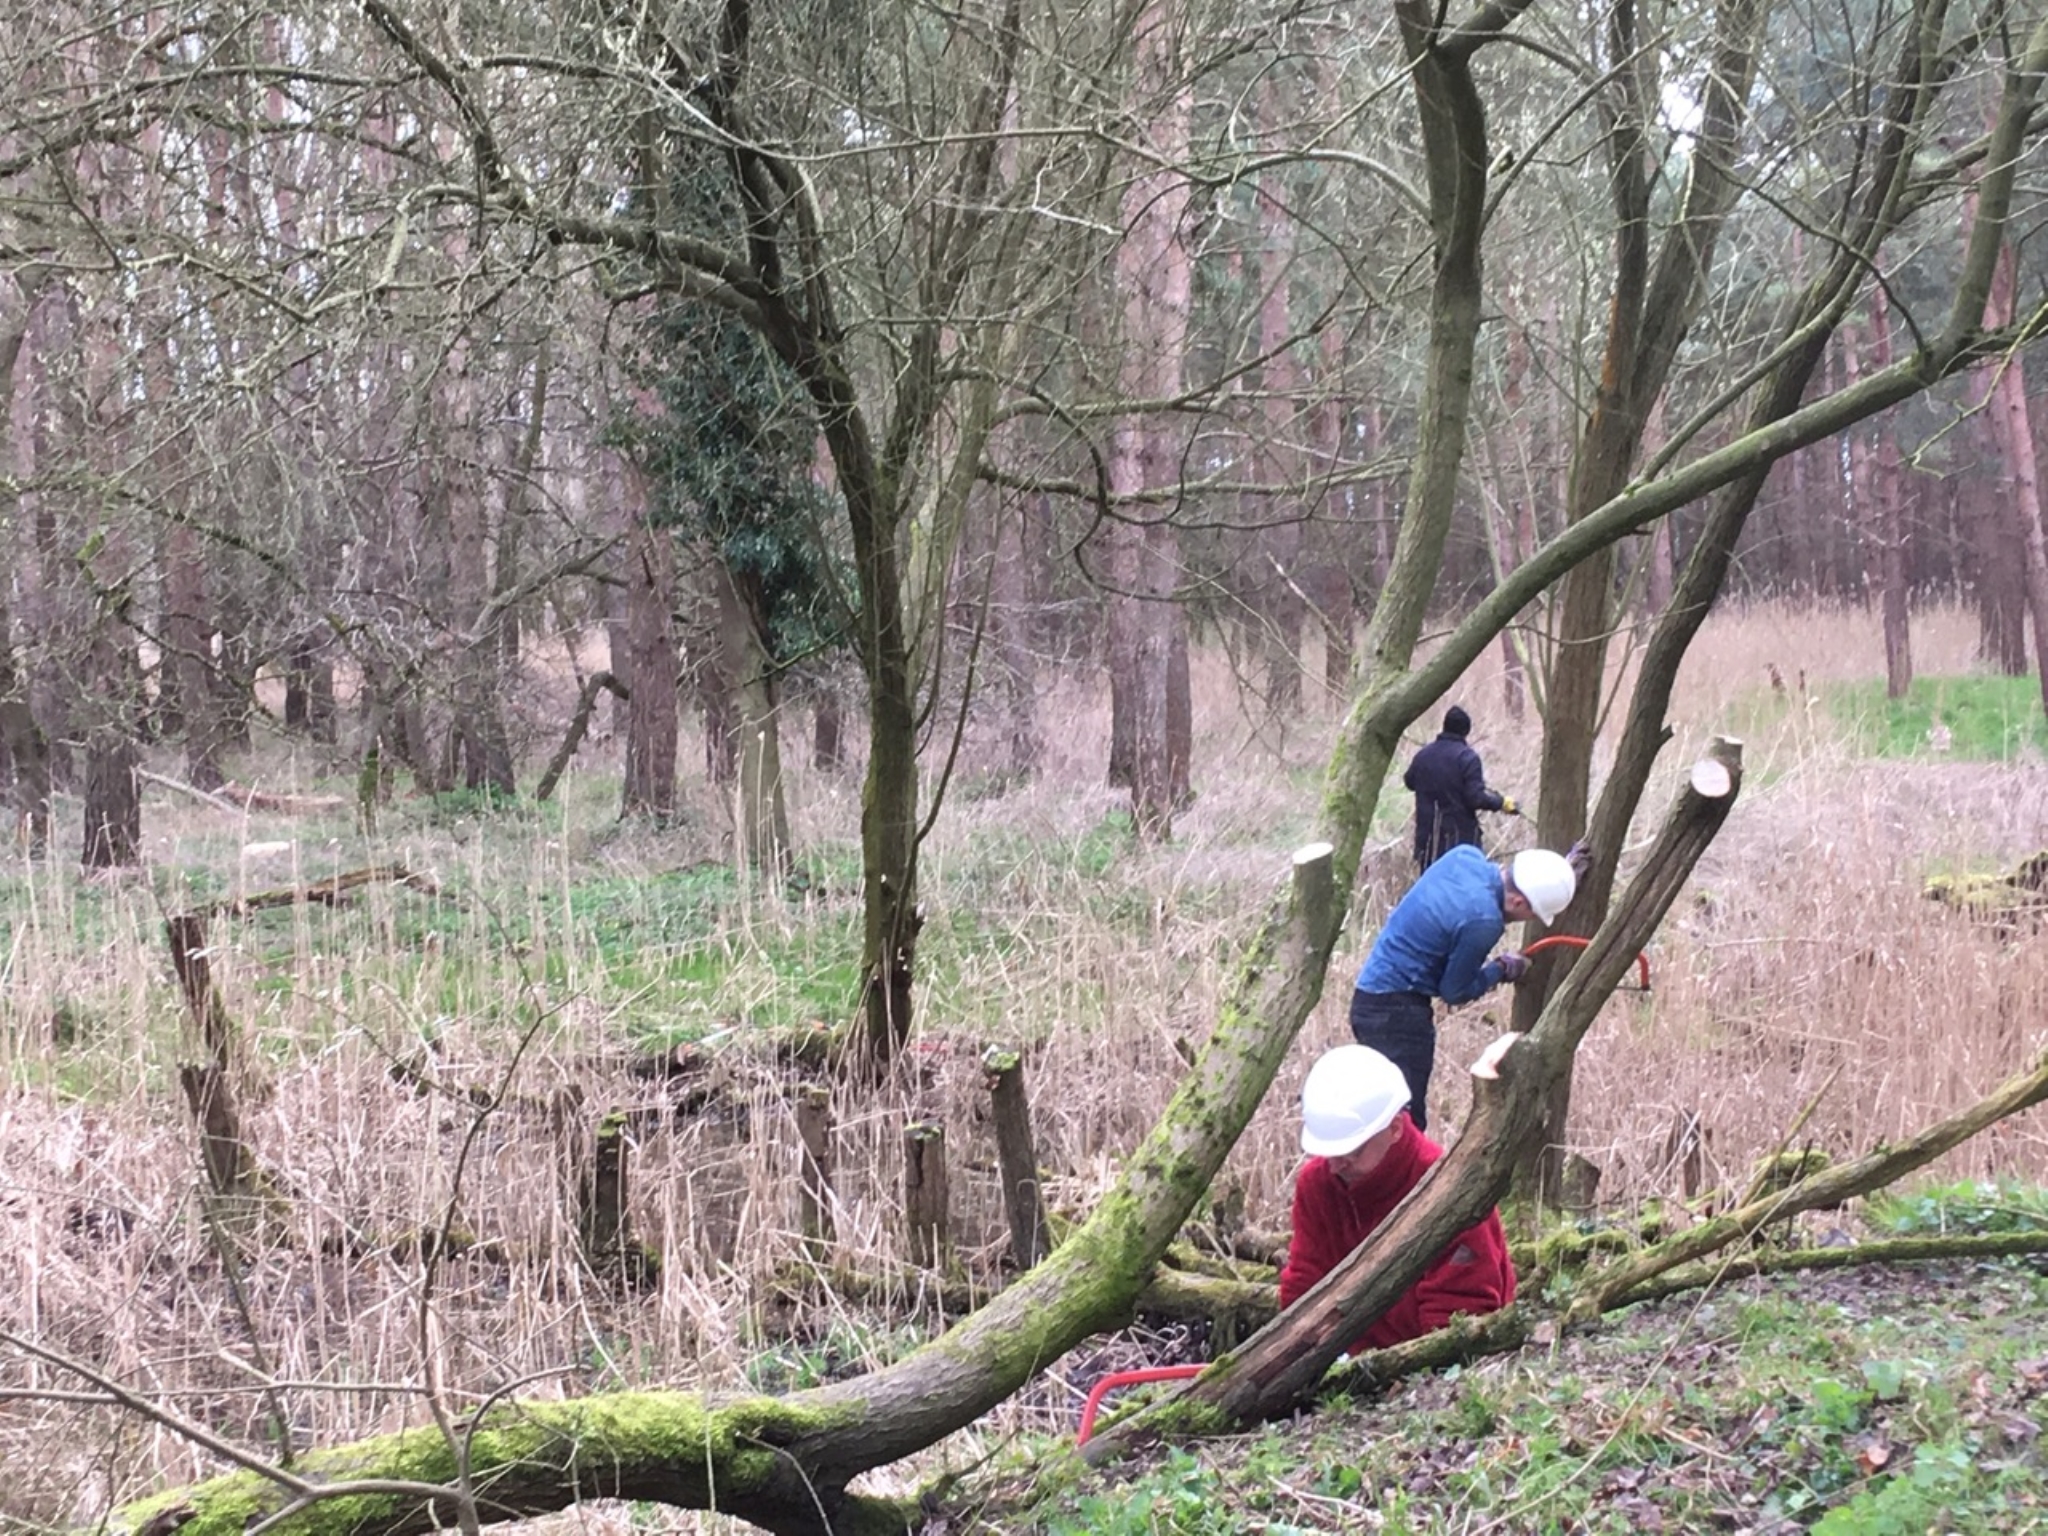 A photo from the FoTF Conservation Event - March 2019 - Clearance work around, and in, the ponds at Harling Woods, Harling : Volunteers work to cut down trees